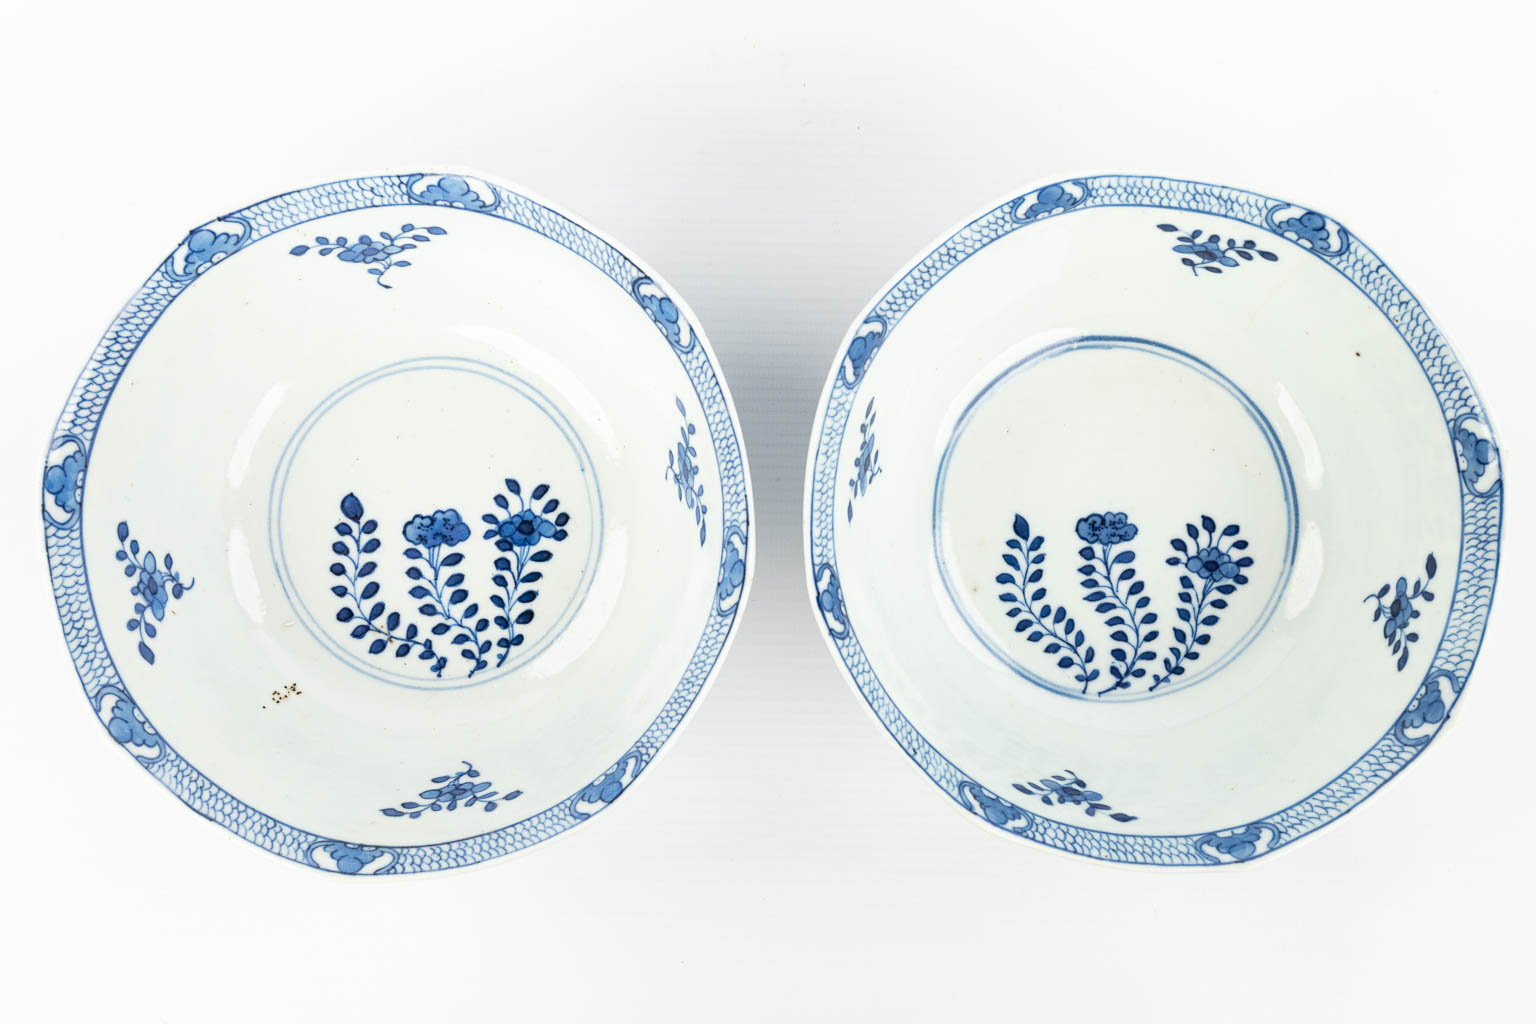 A pair of Chinese bowls made of porcelain with blue-white flower decor and marked Kangxi. (H:7,2cm)